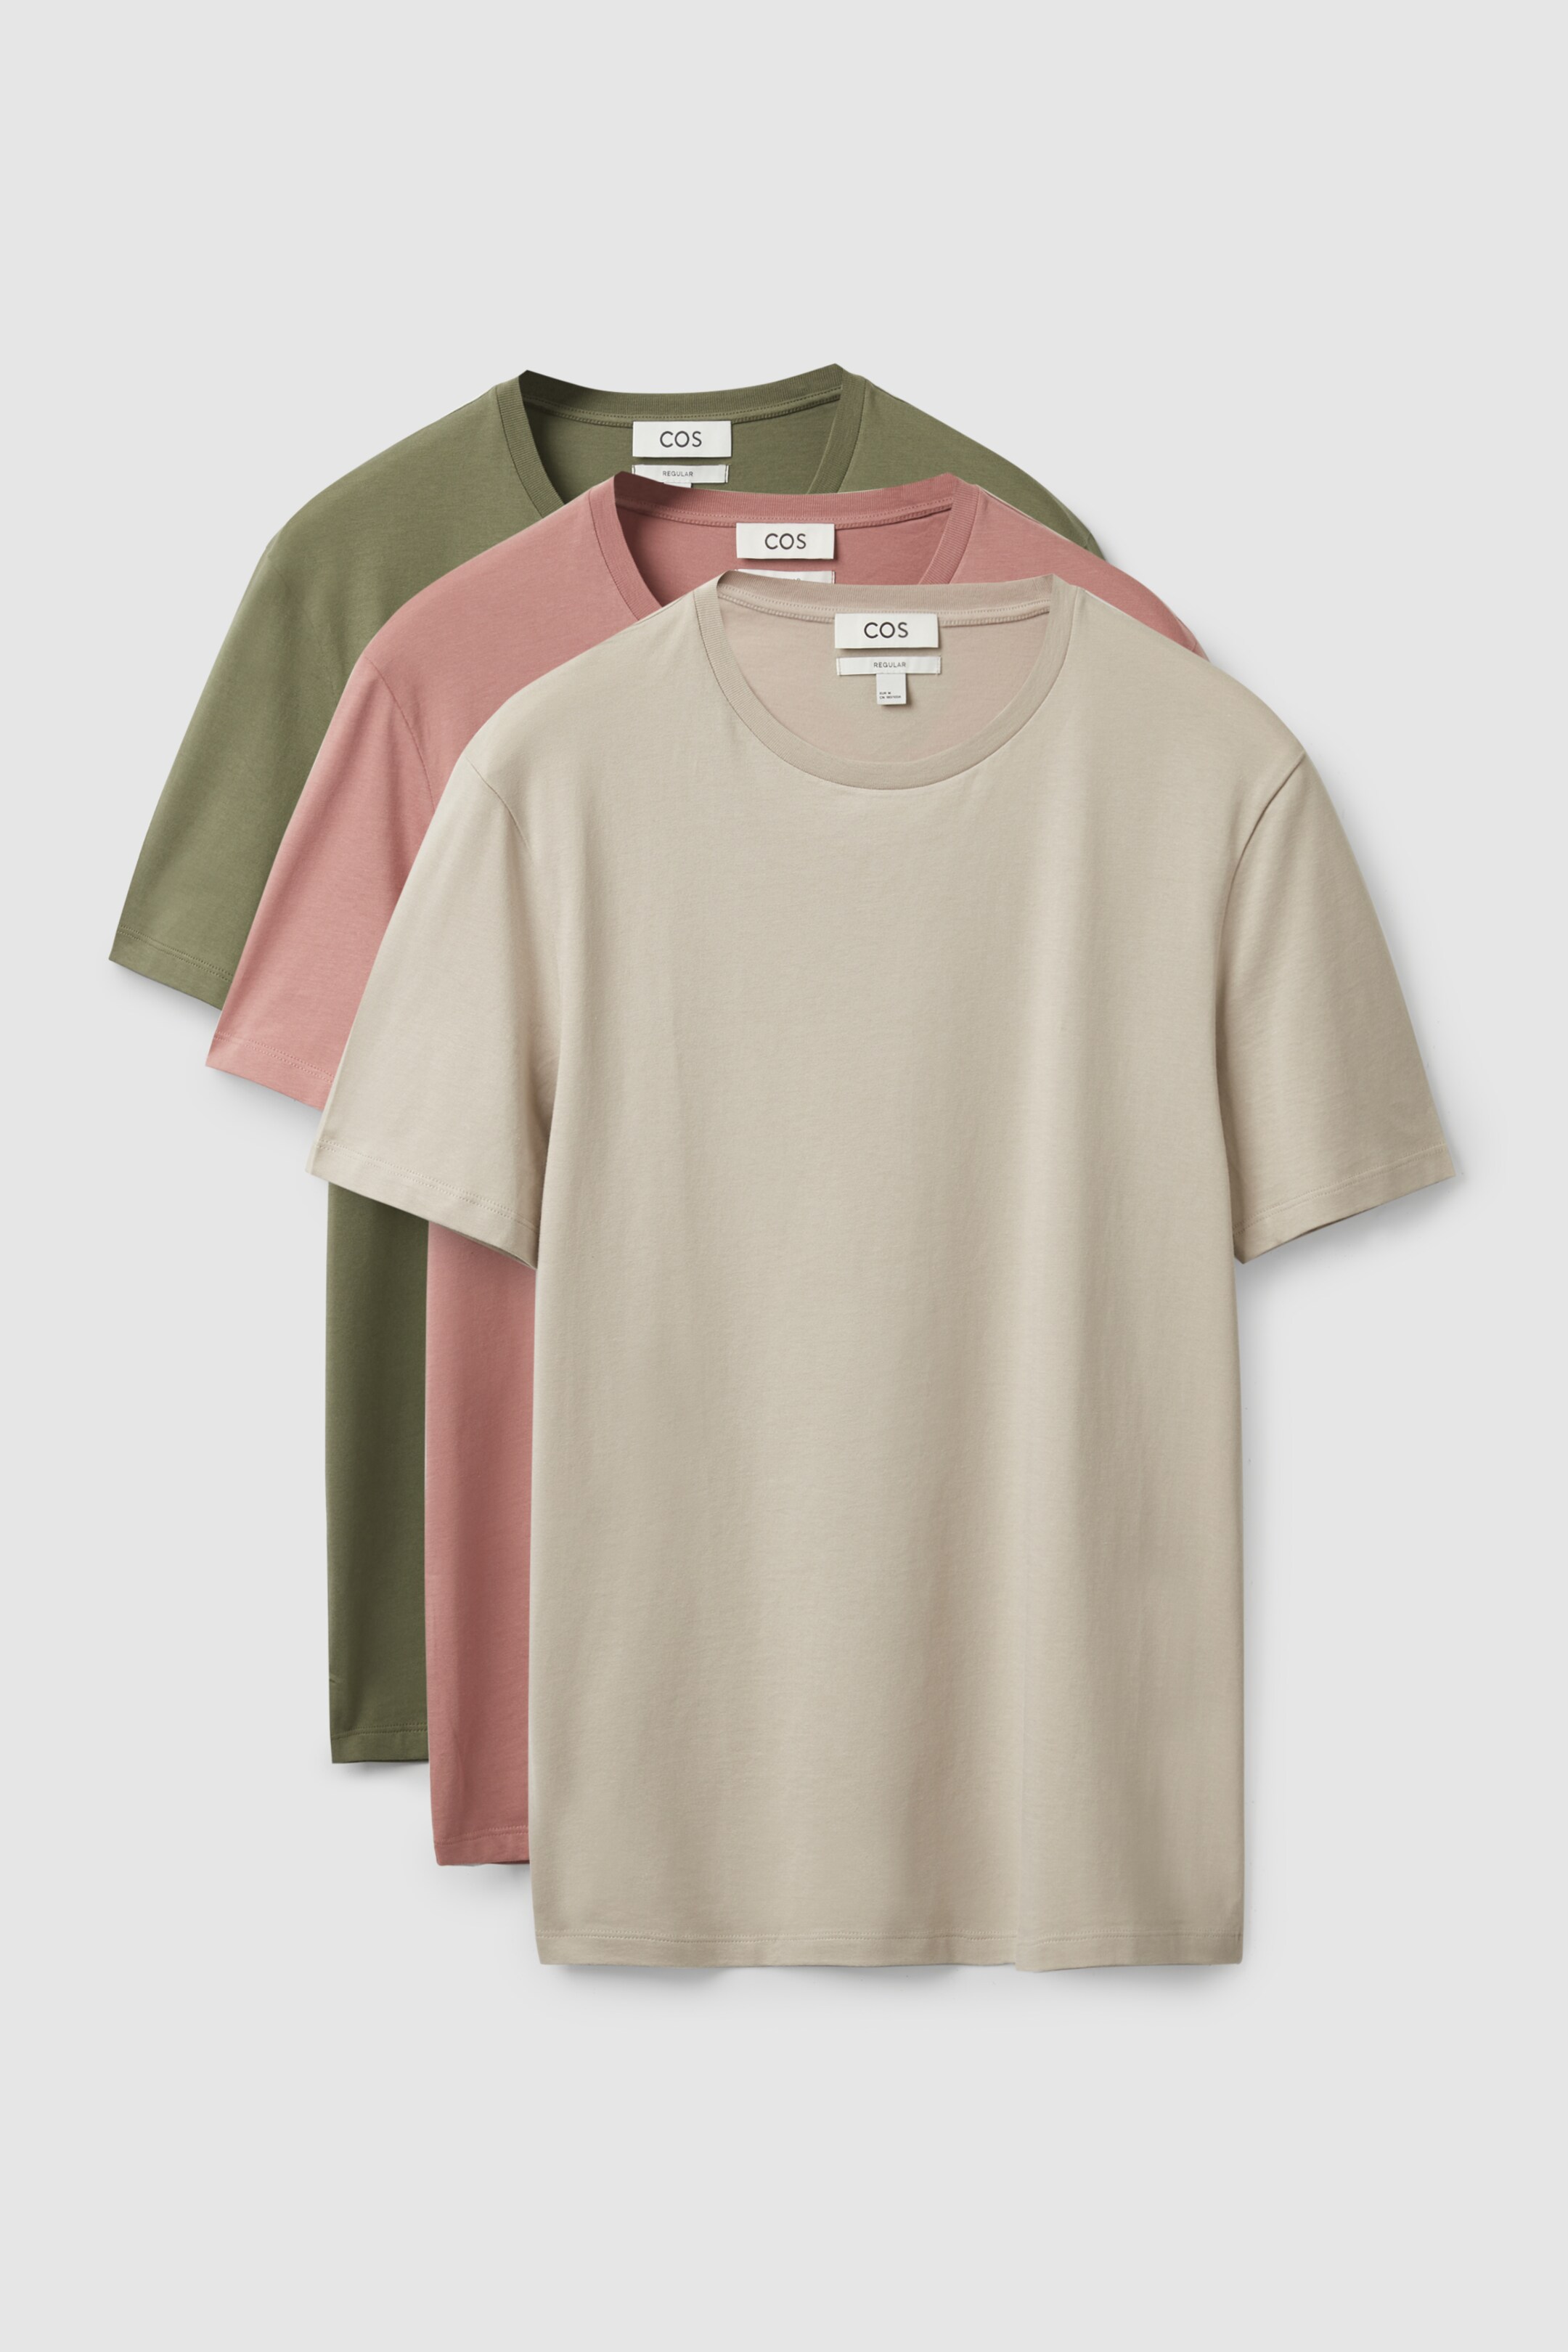 Front image of cos 3-PACK REGULAR-FIT LIGHTWEIGHT T-SHIRTS in KHAKI / ECRU / PINK